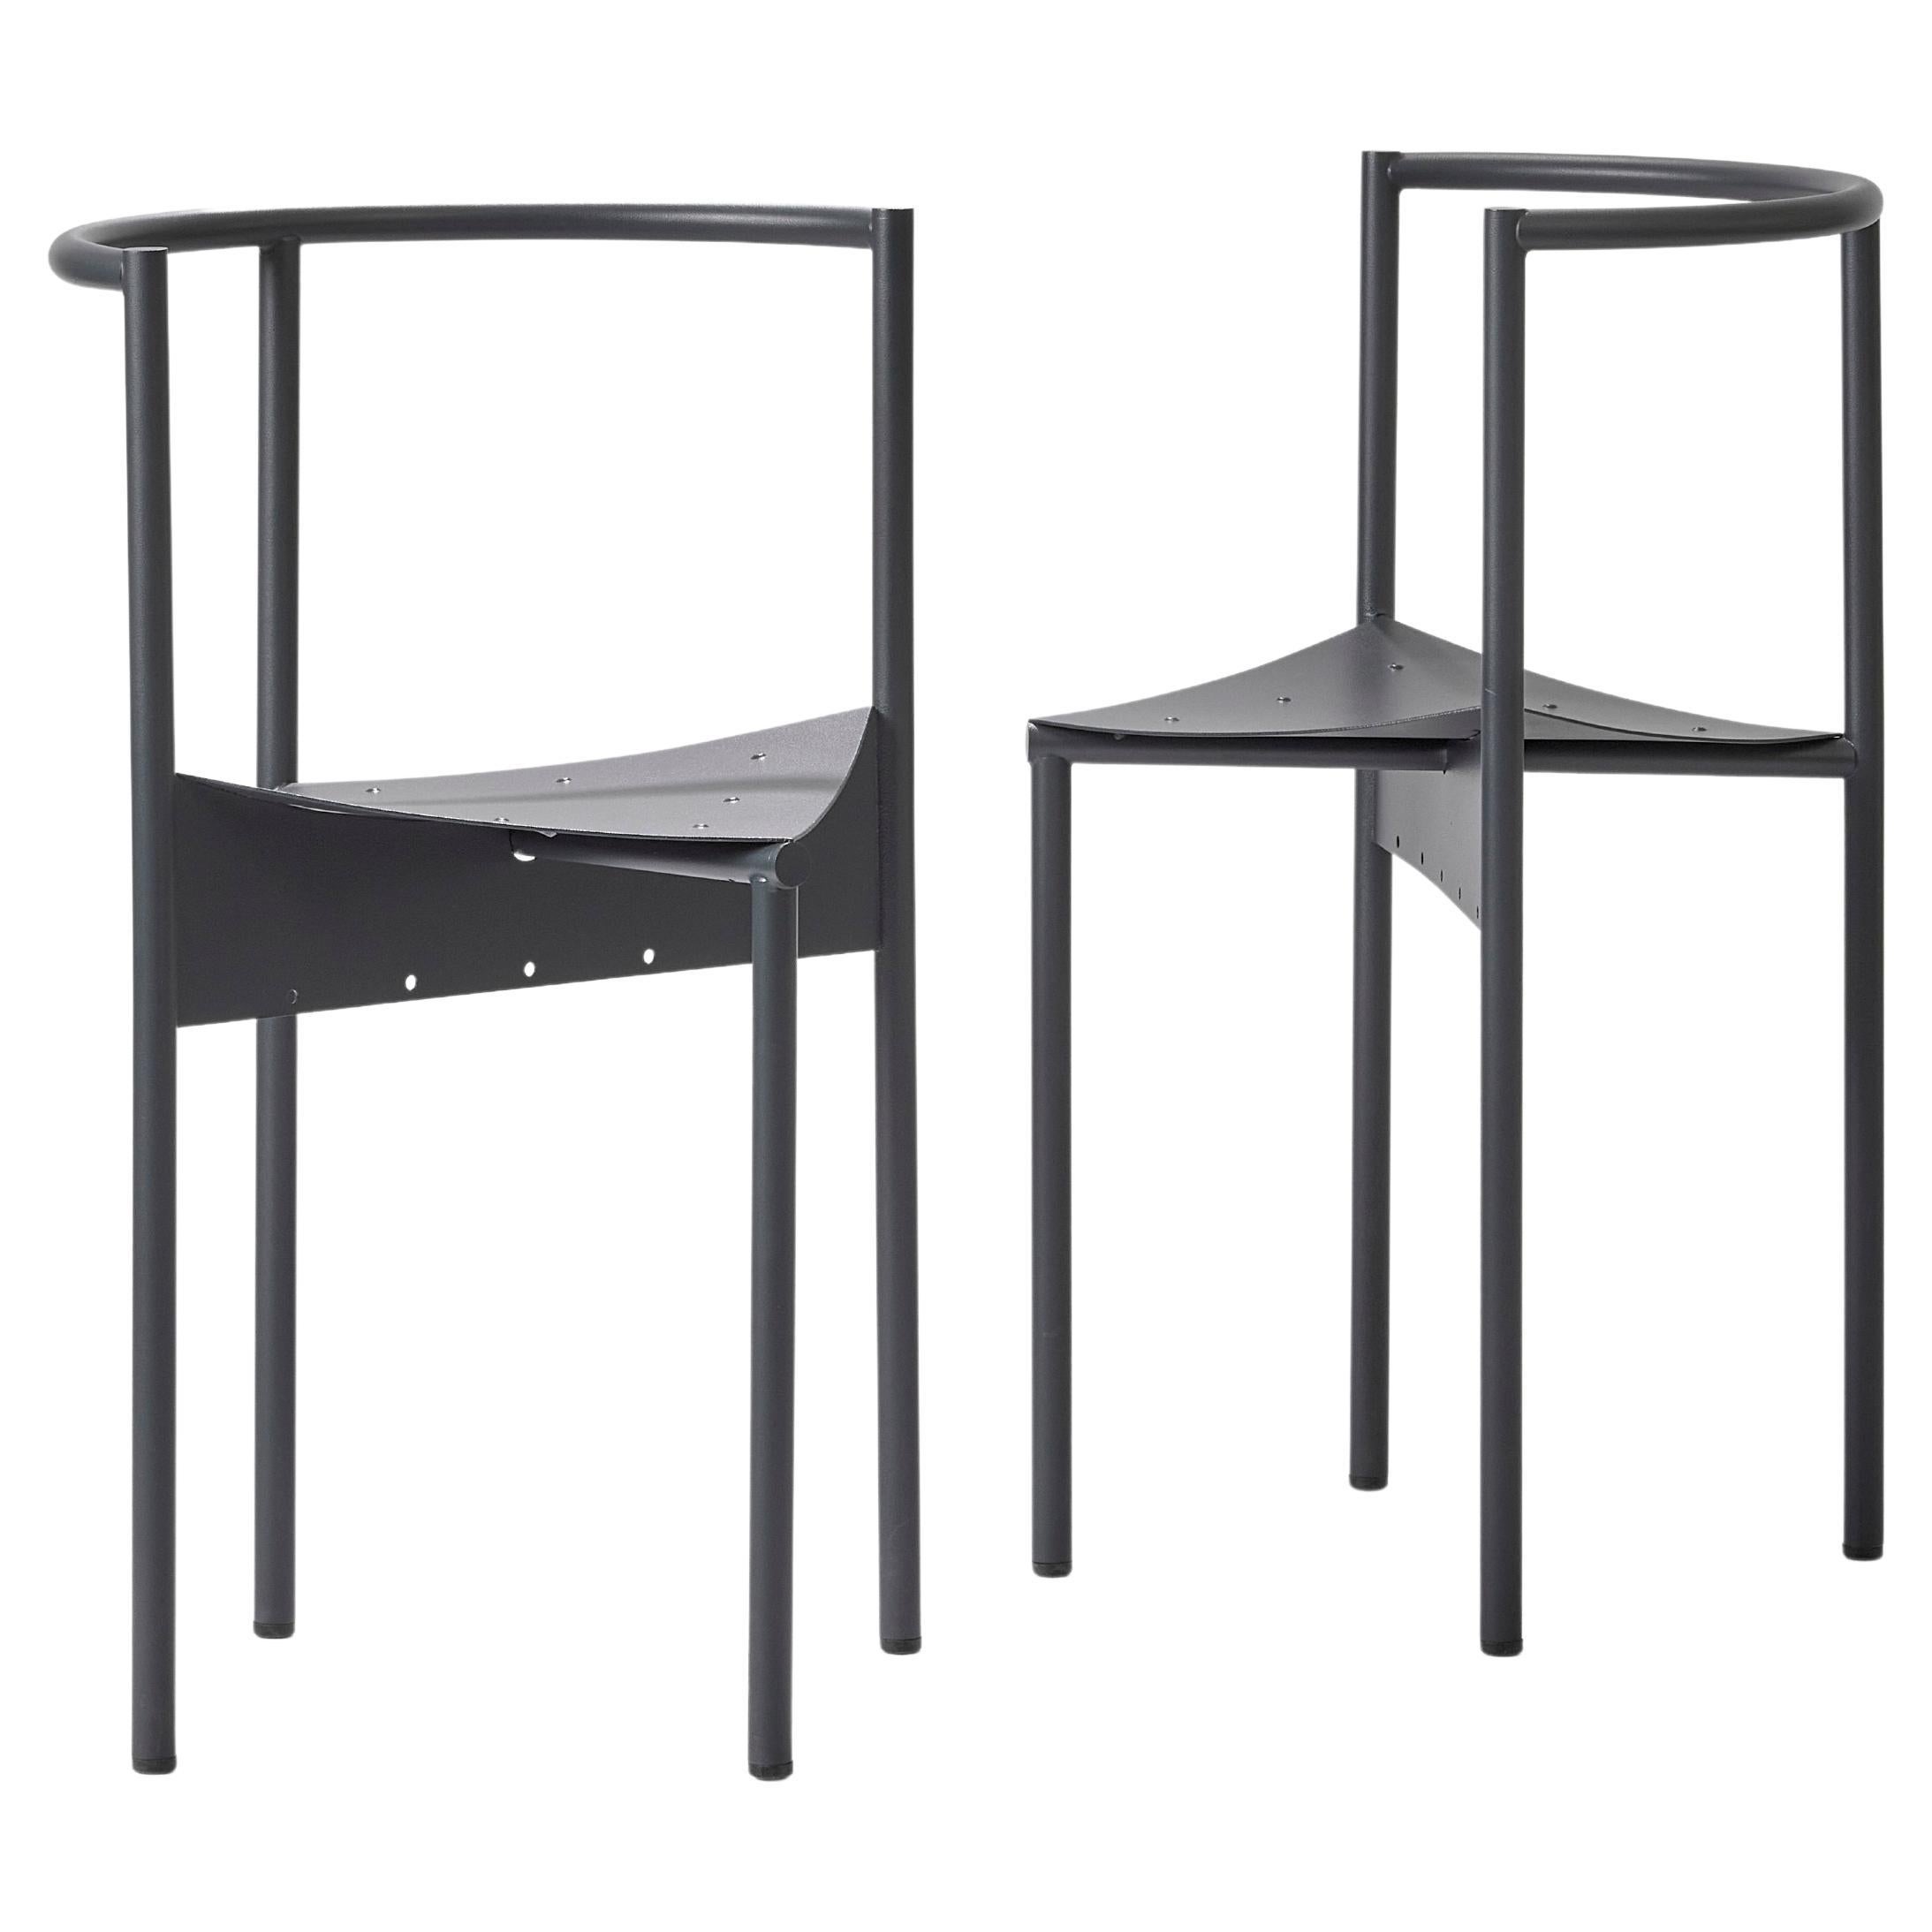 Philippe Starck 'Born in 1949' Wendy Wright, 1986 For Sale